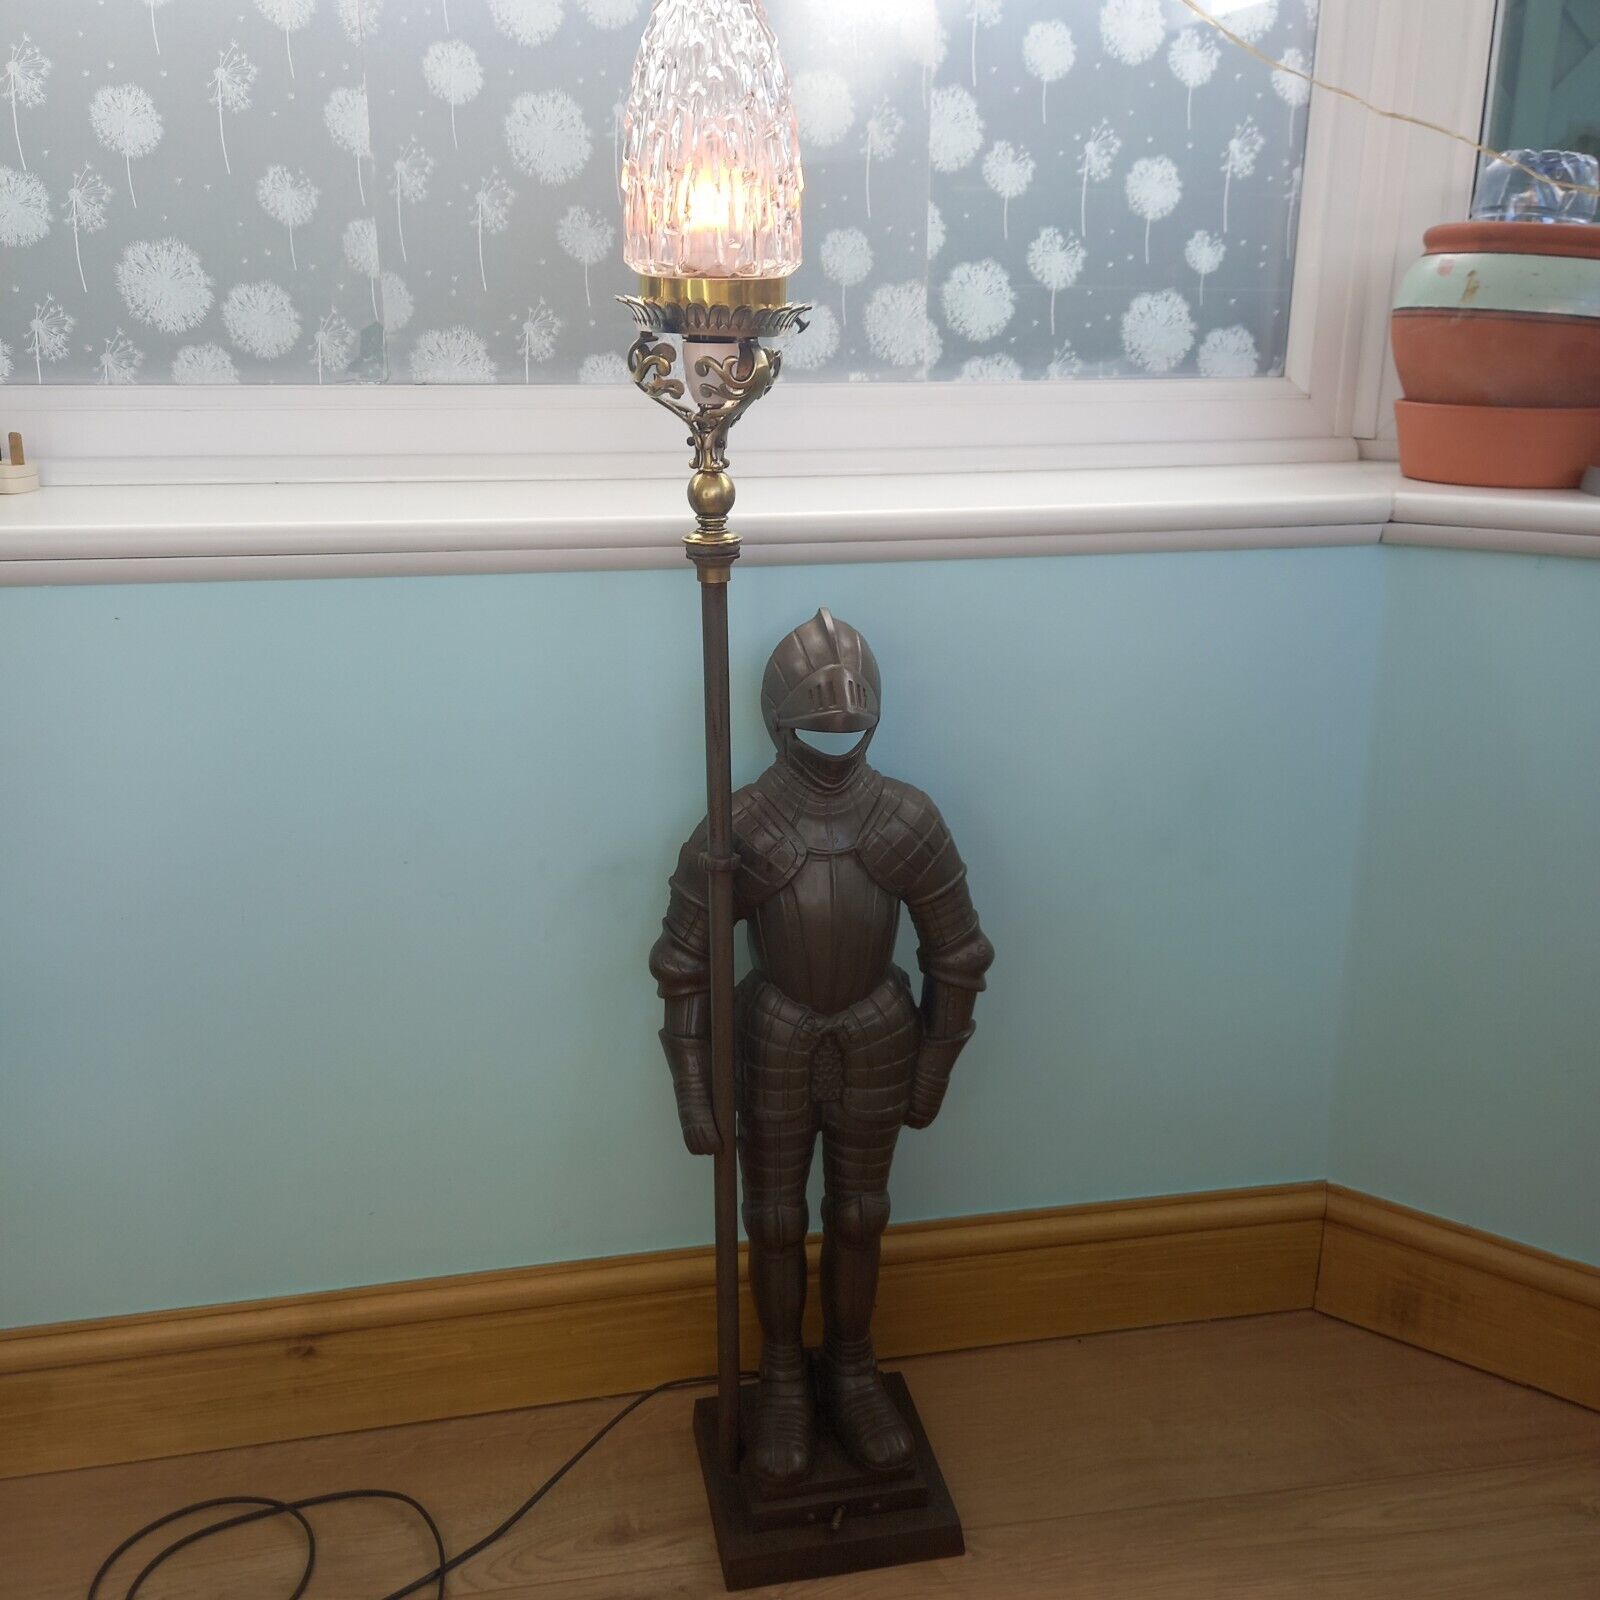 1930s NESTOR KNIGHT IN ARMOUR TABLE LAMP CAST IRON w/ Flame Effect Lamp Vintage